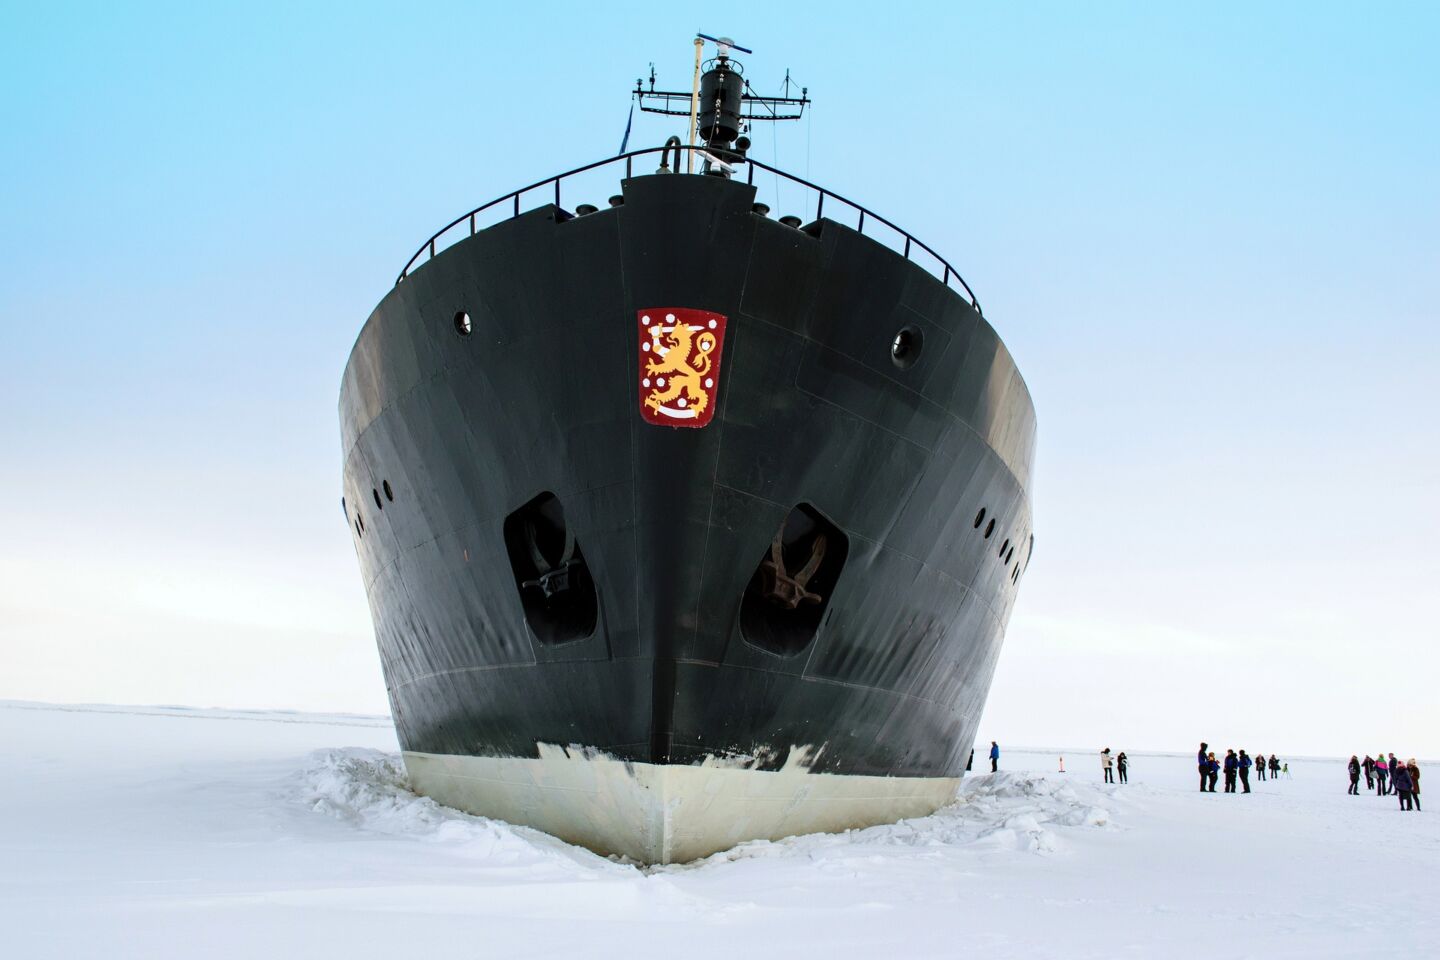 The Icebreaker Sampo, a tourist attraction in Kemi, a Finnish Lapland filming location